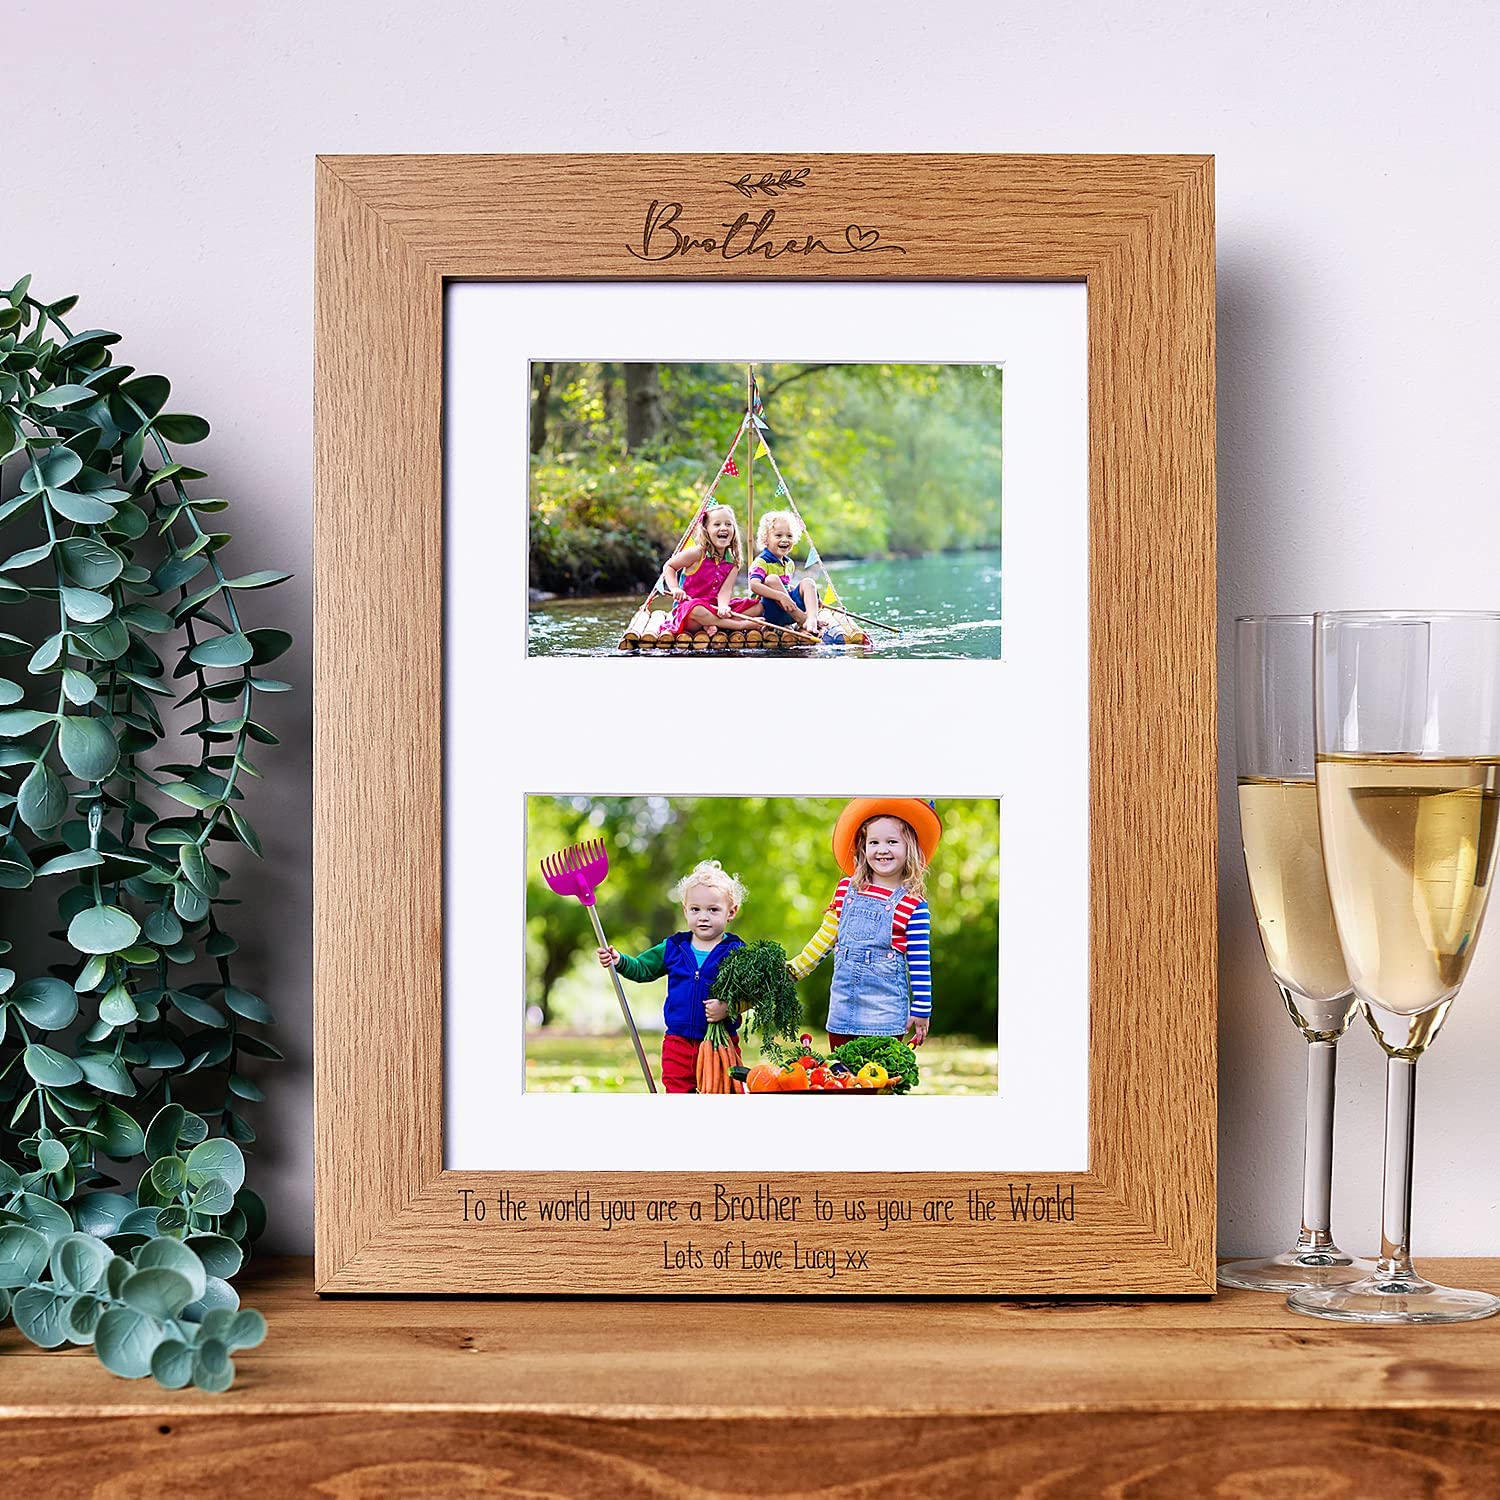 Personalised Brother Wooden Double Photo Frame Gift Landscape